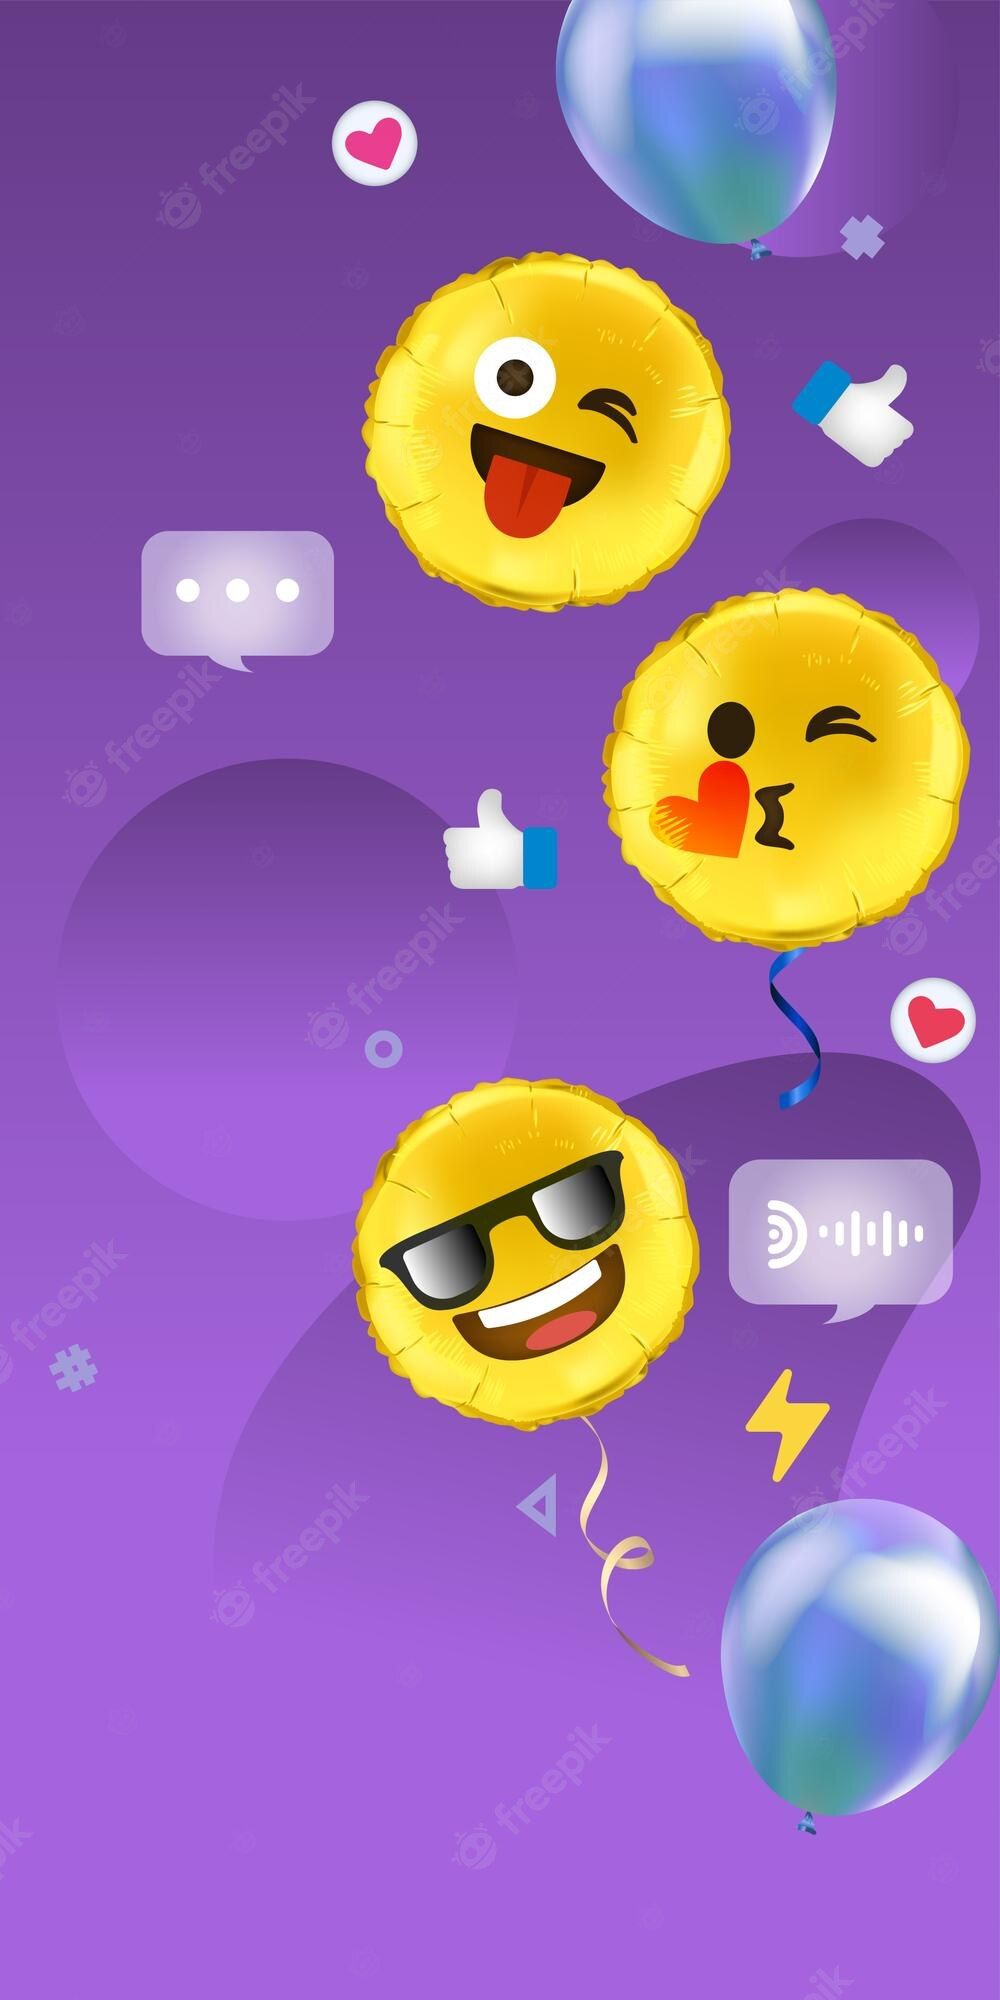 Emoticons with sunglasses and a tie, surrounded by speech bubbles and balloons - Emoji